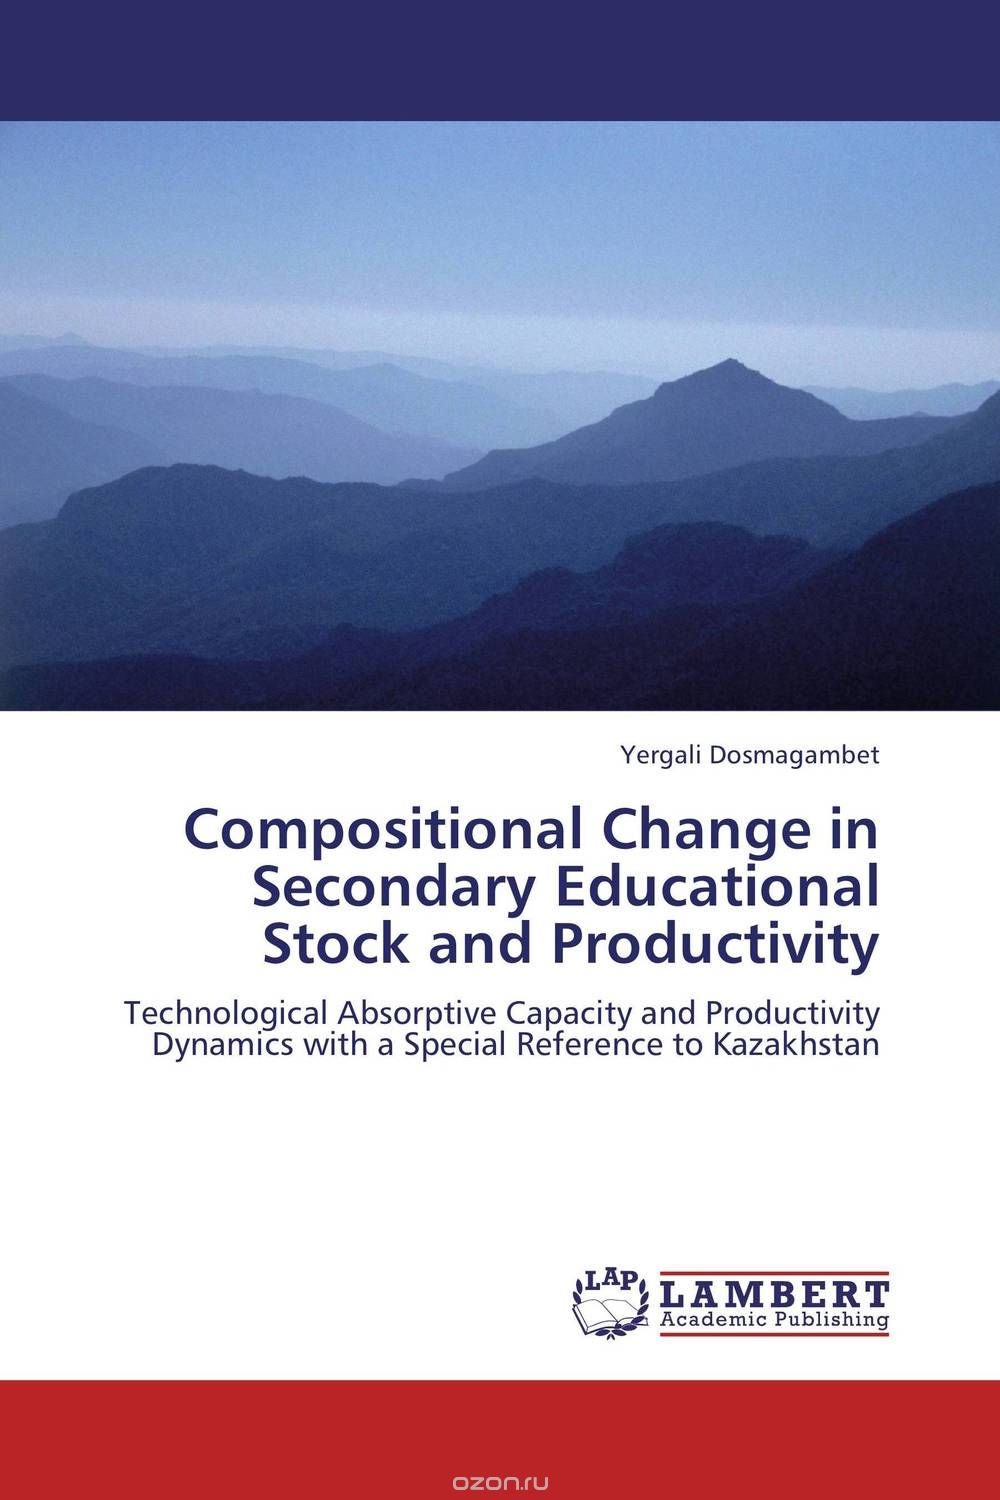 Скачать книгу "Compositional Change in Secondary Educational Stock and Productivity"